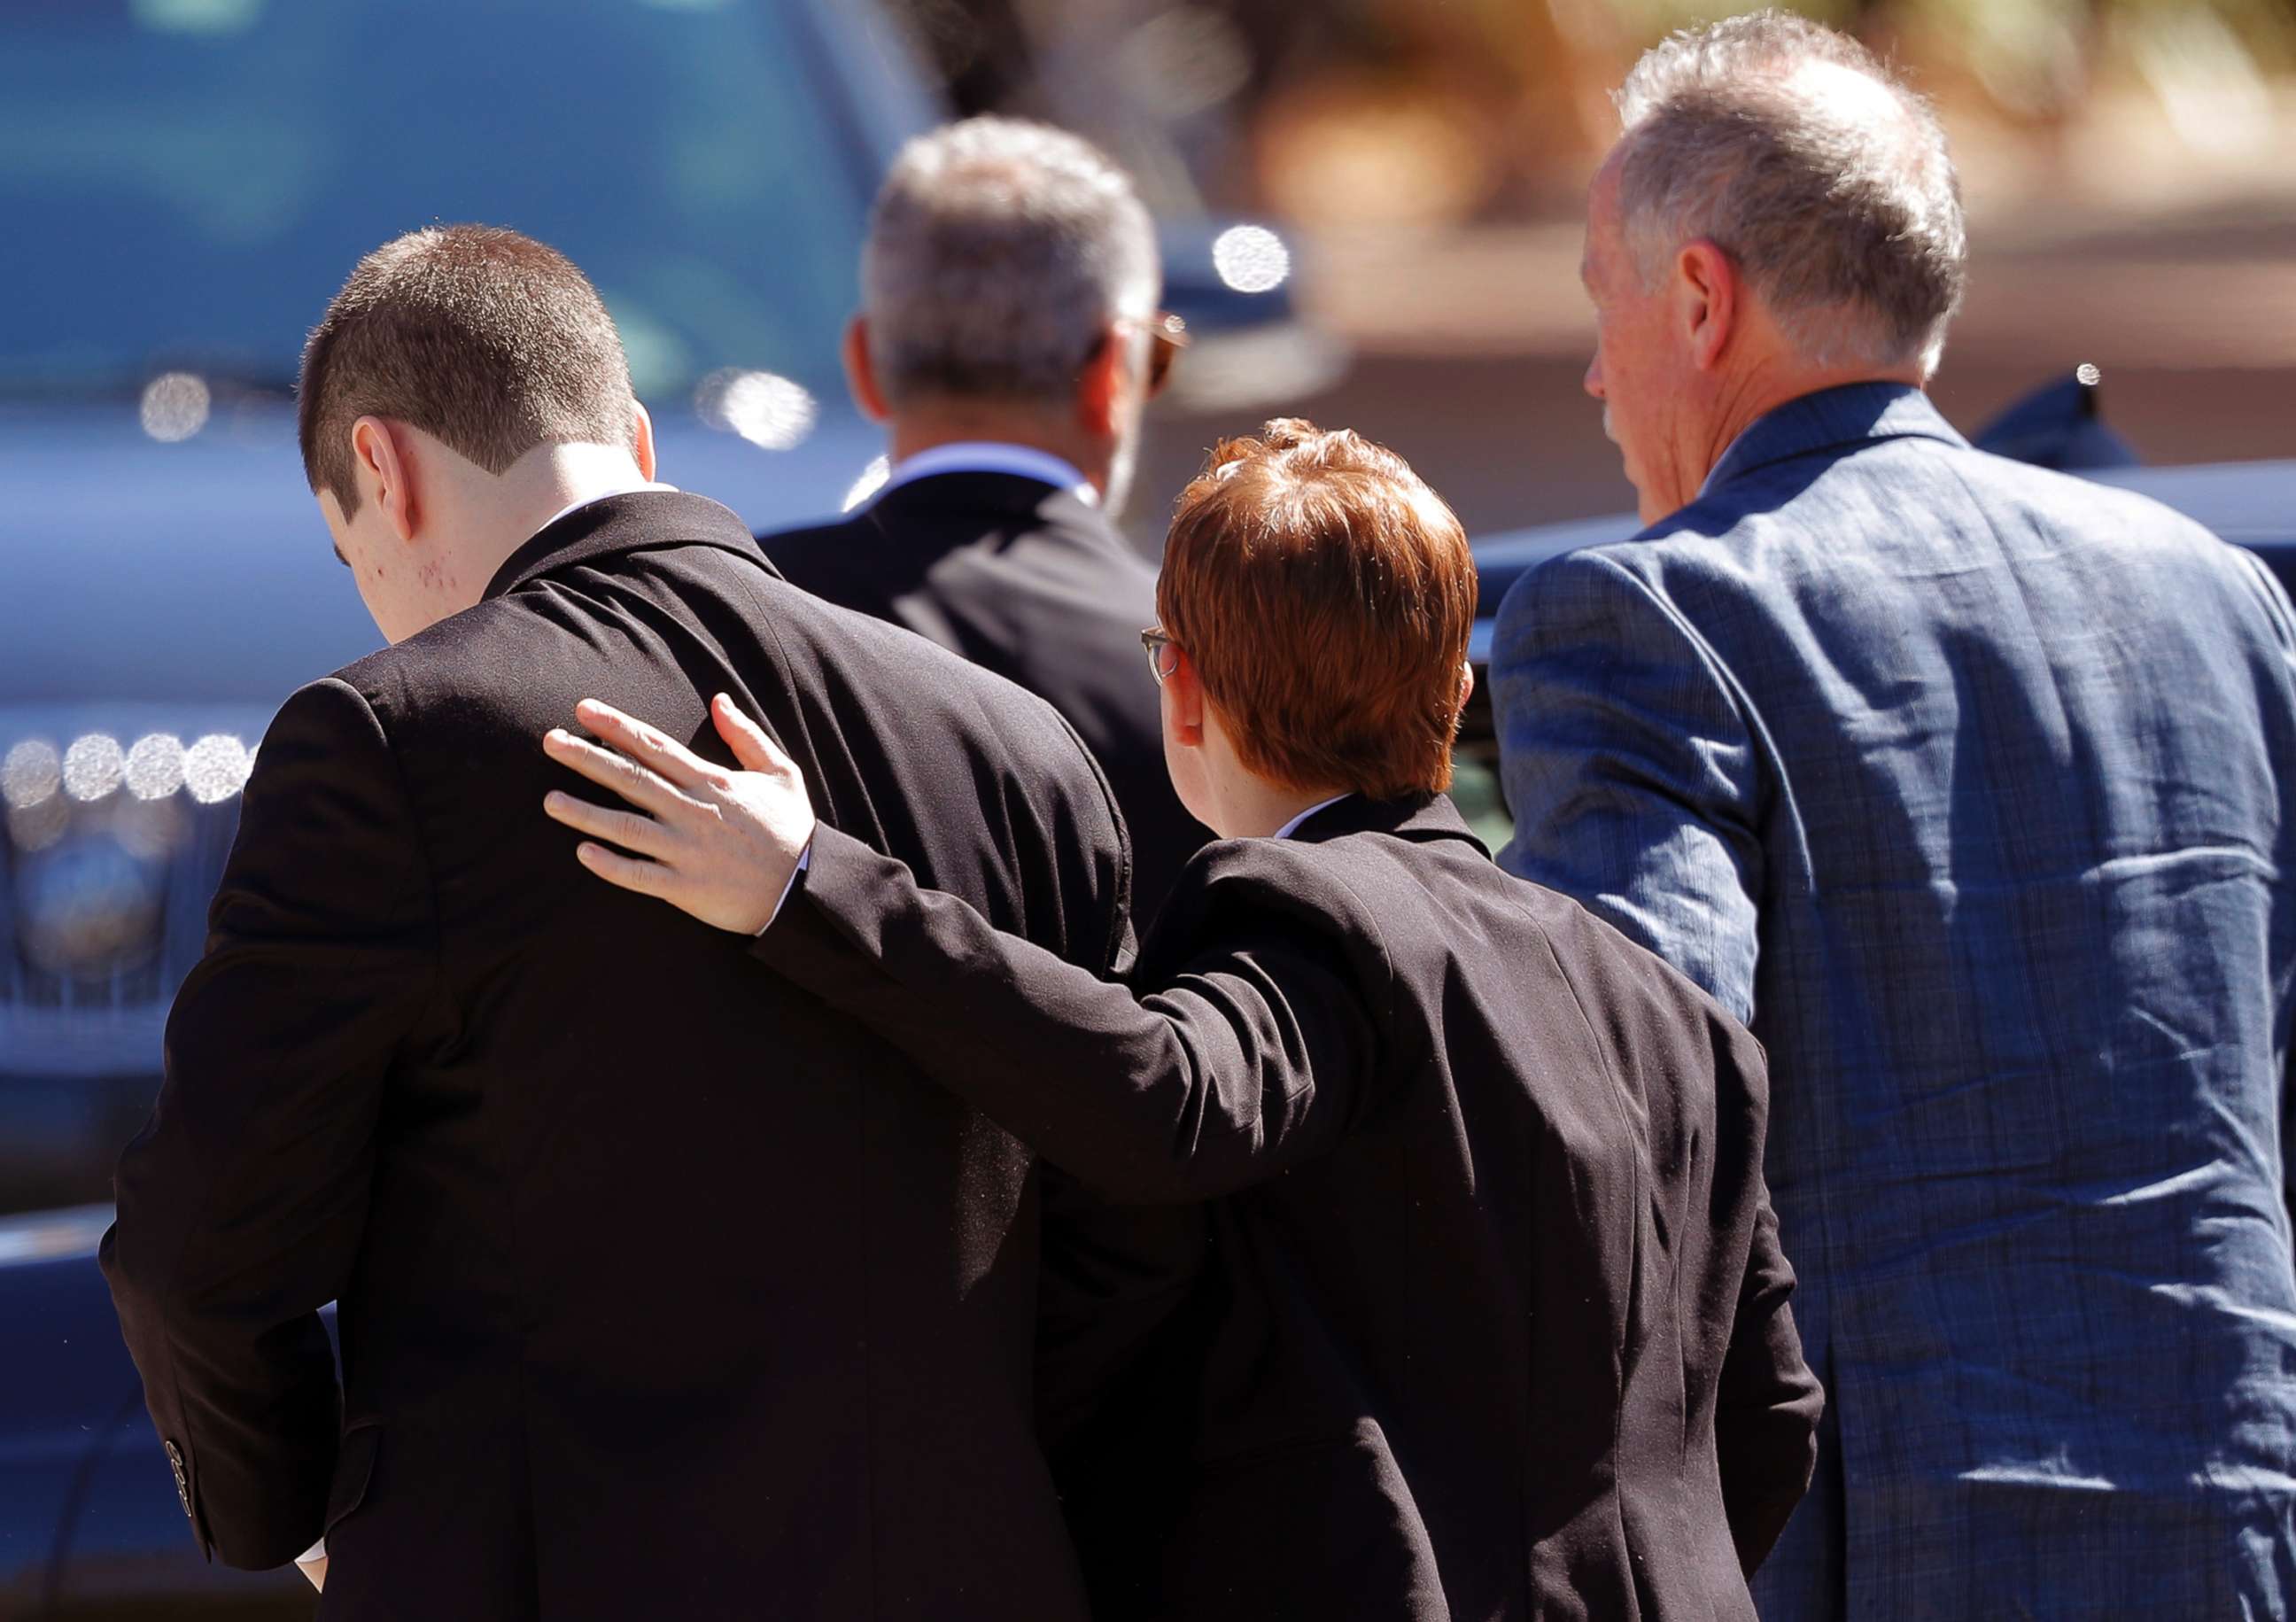 PHOTO: Family and friends console each other as they arrive for the funeral of Meadow Pollack, a victim of the Wednesday shooting at Marjory Stoneman Douglas High School, in Parkland, Fla., Feb. 16, 2018.